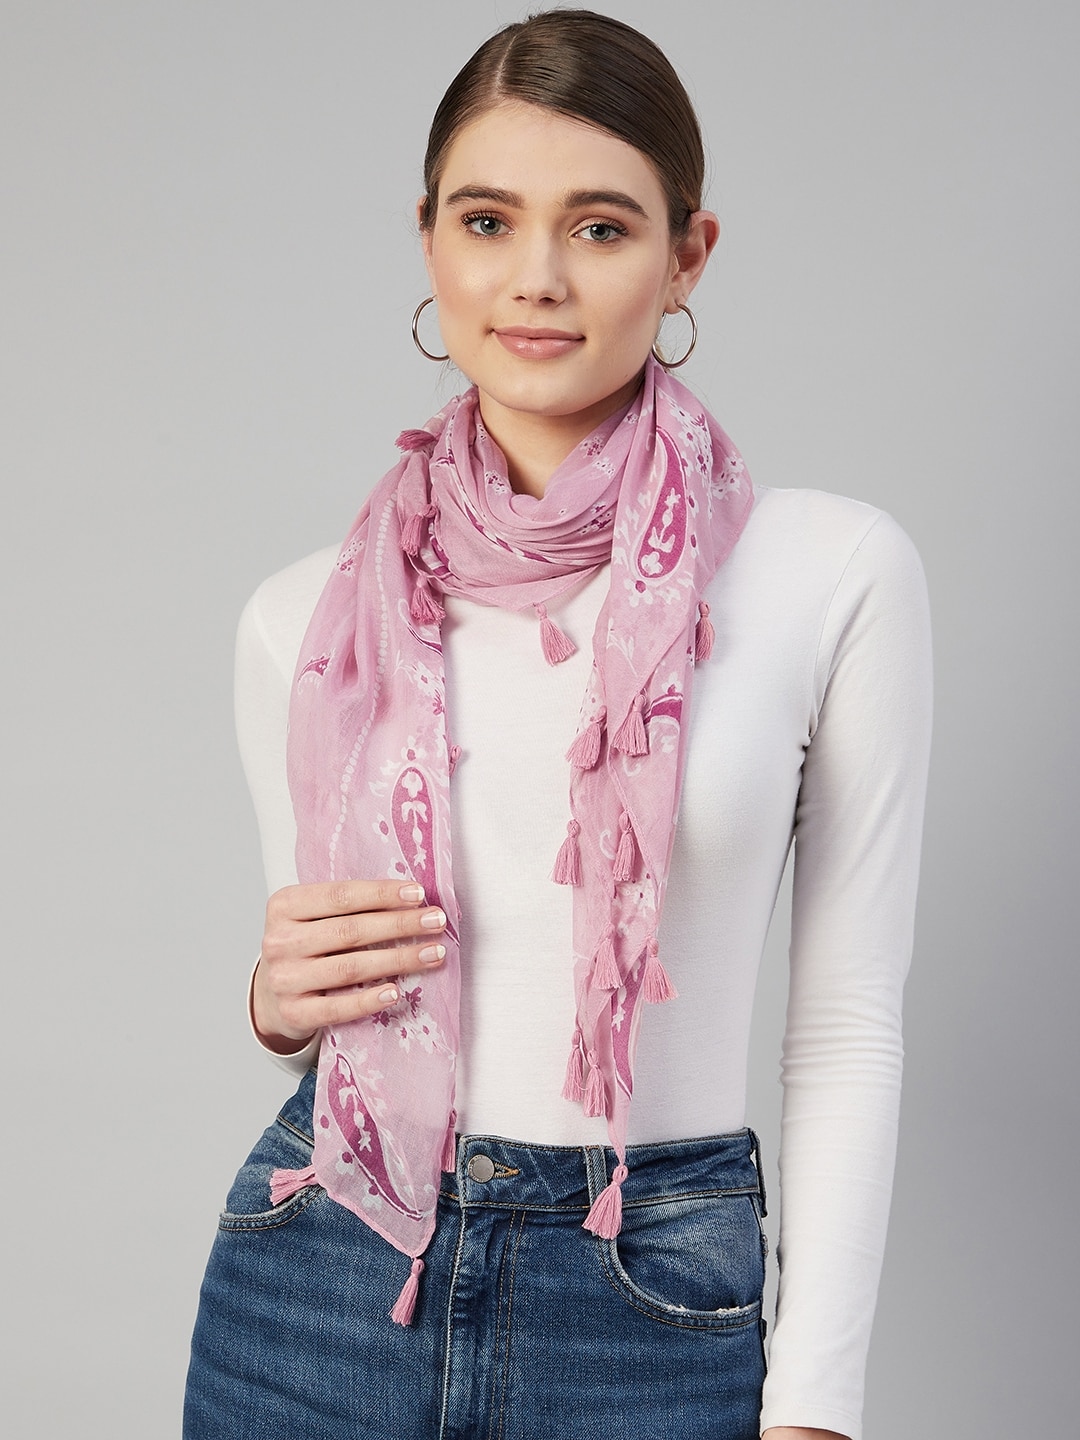 Marks & Spencer Women Pink & White Printed Scarf Price in India